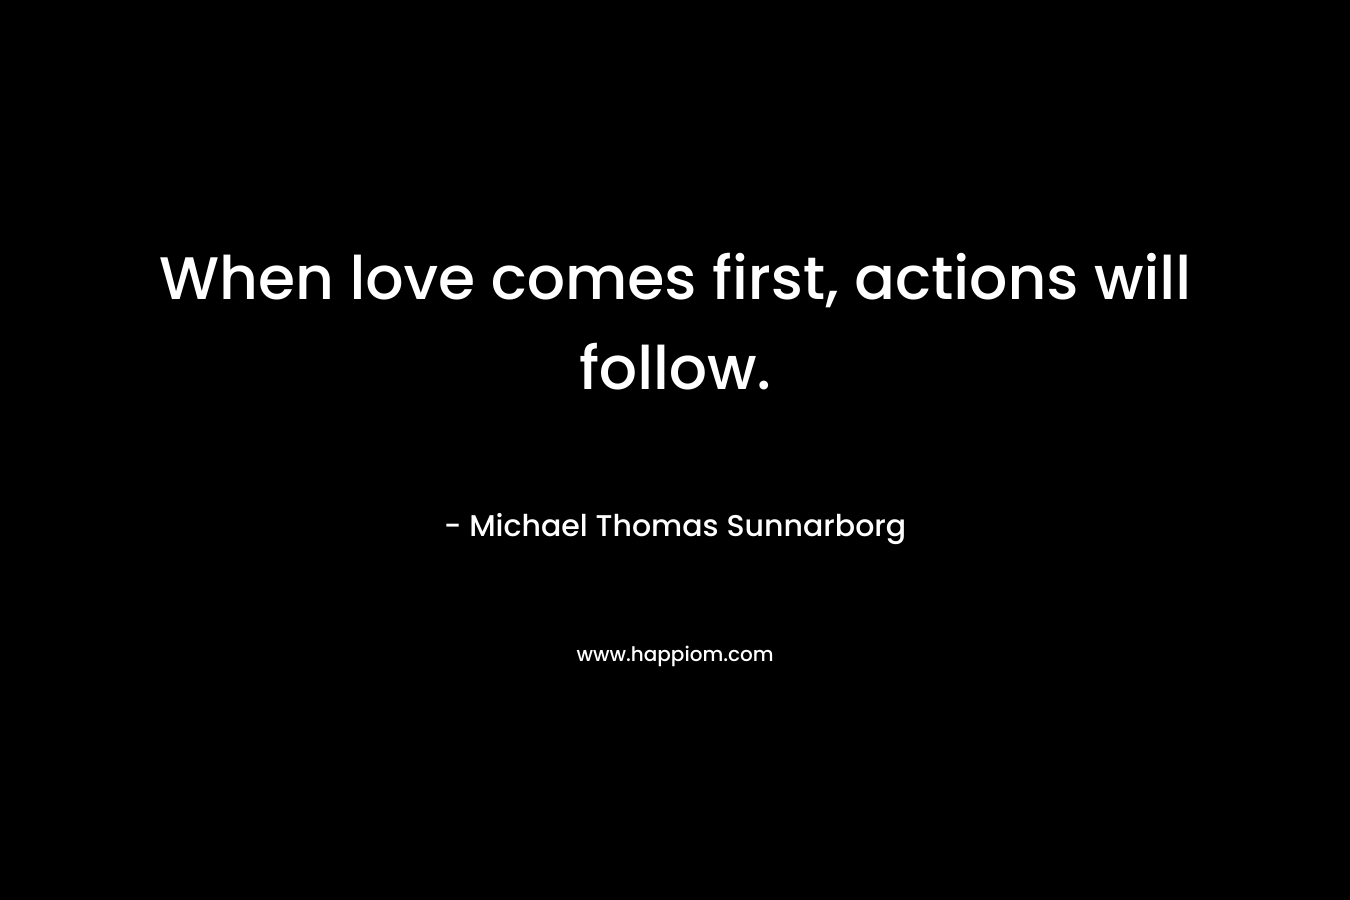 When love comes first, actions will follow. – Michael Thomas Sunnarborg